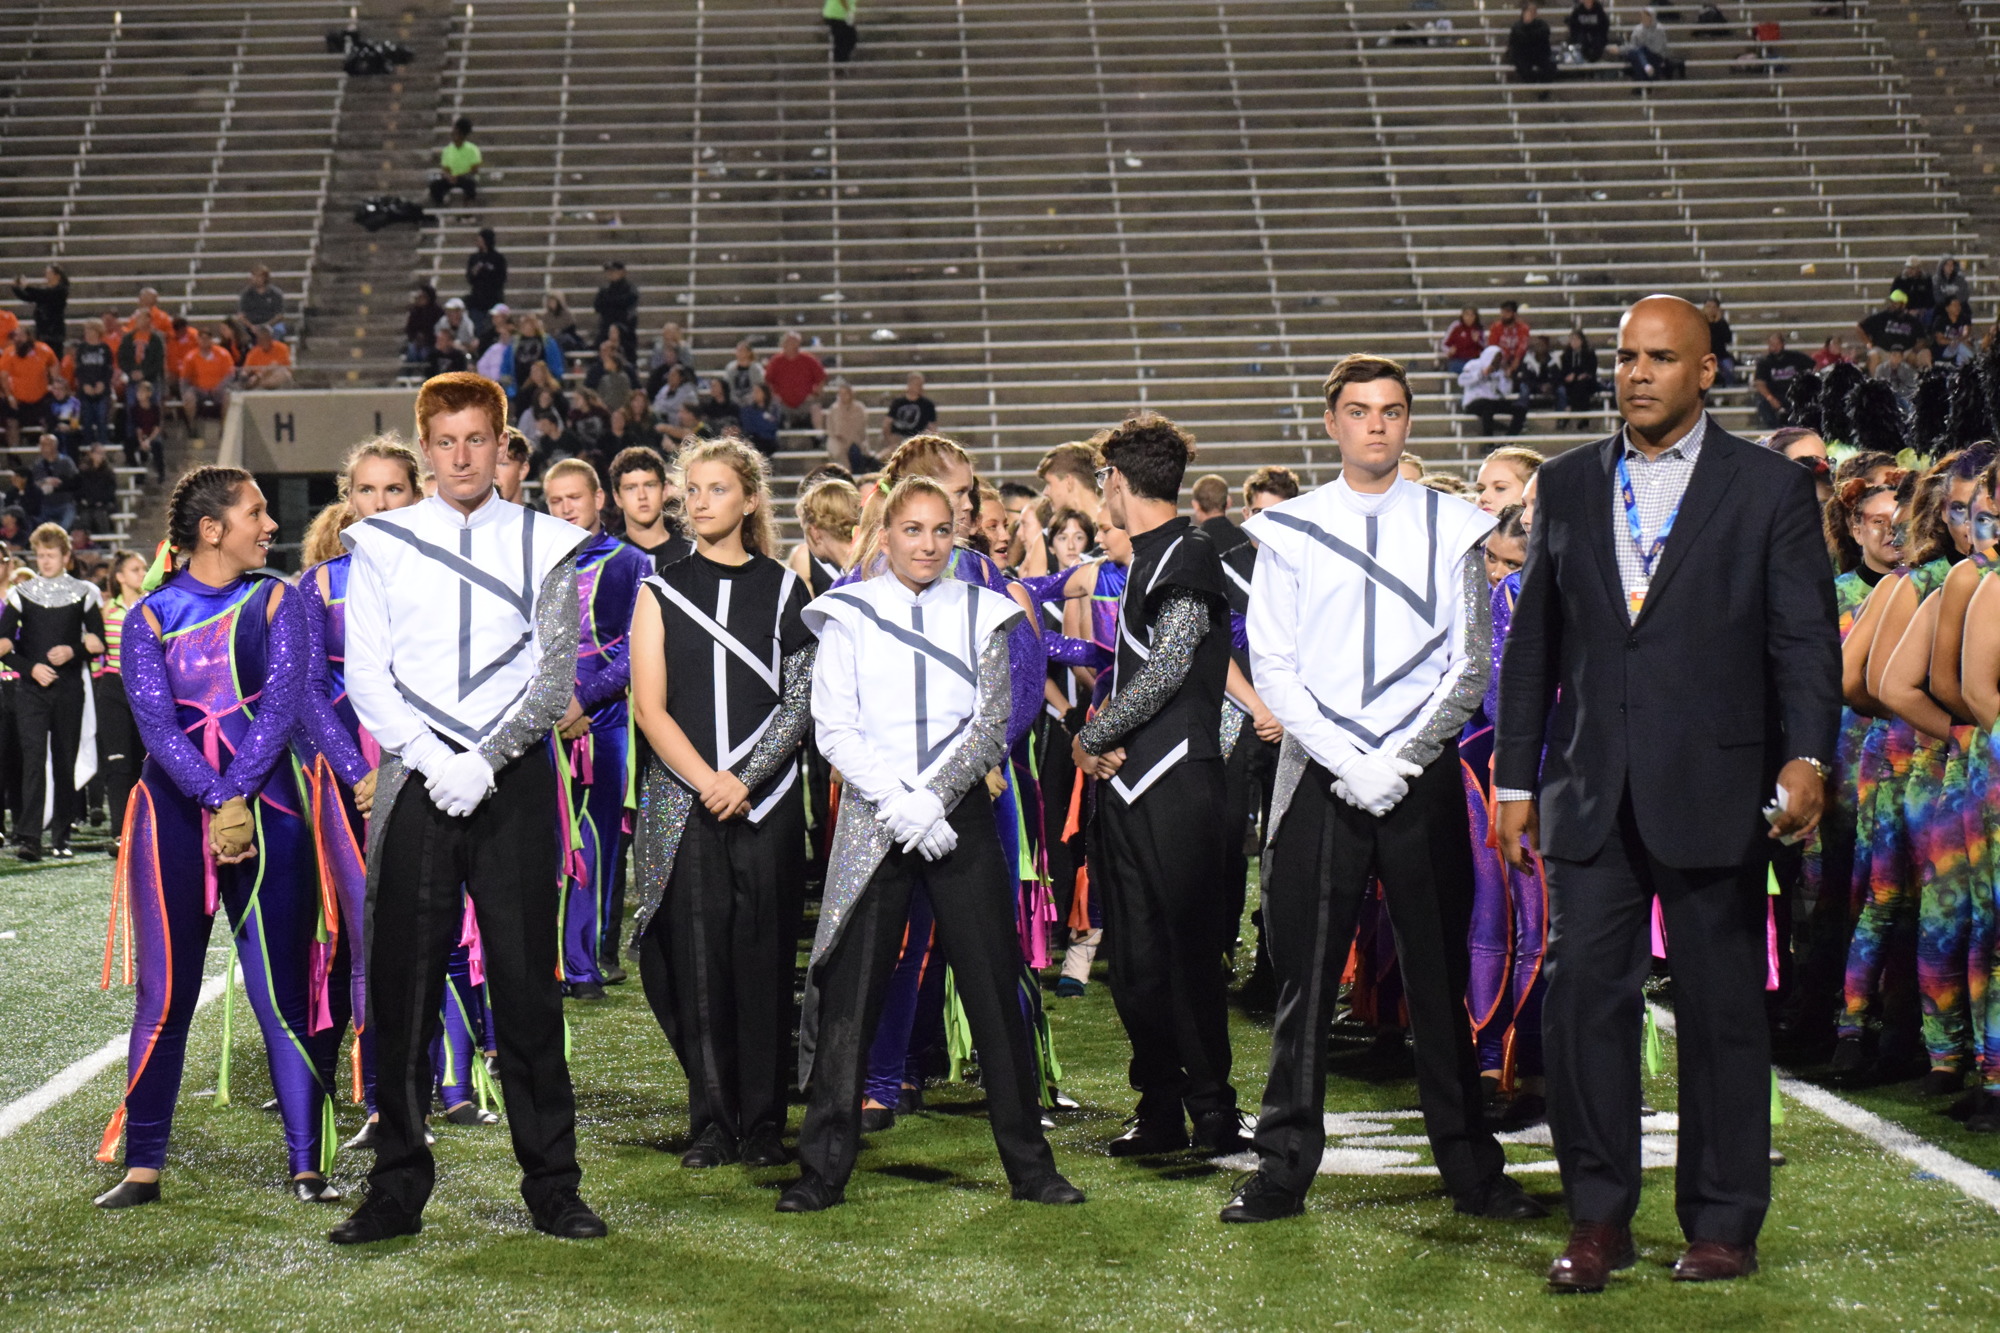 Members of the Marching Mustangs and Ron Lambert, the director of bands, await the results of the 2019 state championship. The band placed third. File photo.